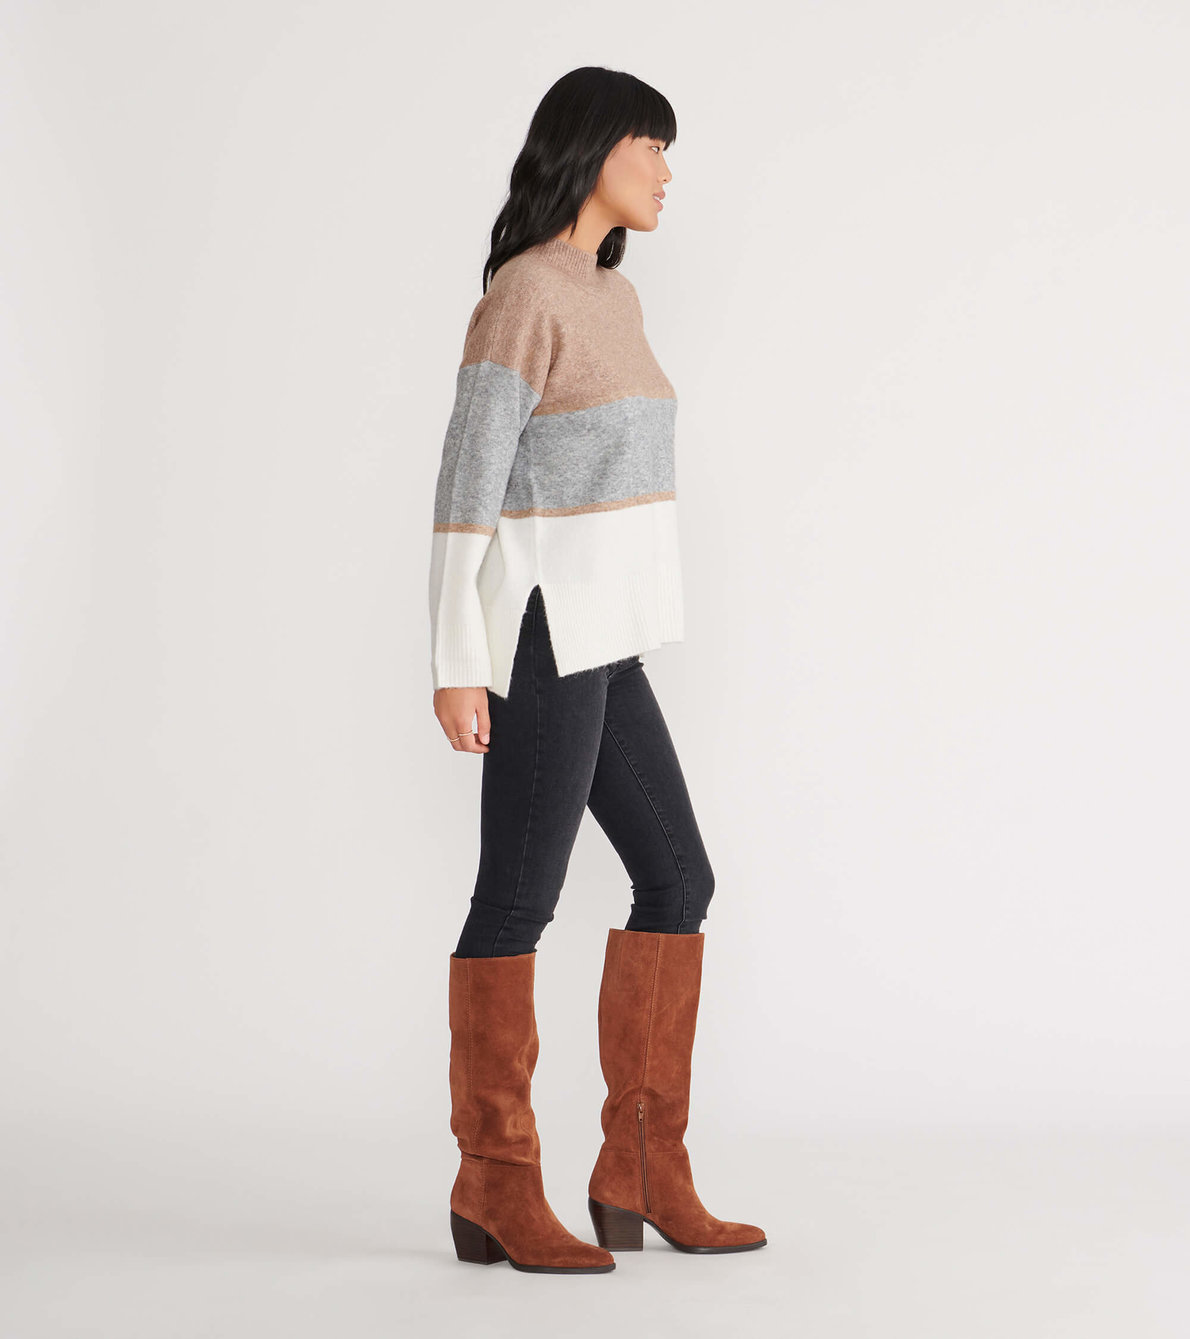 View larger image of Mock Neck Sweater - Camel Colour Block